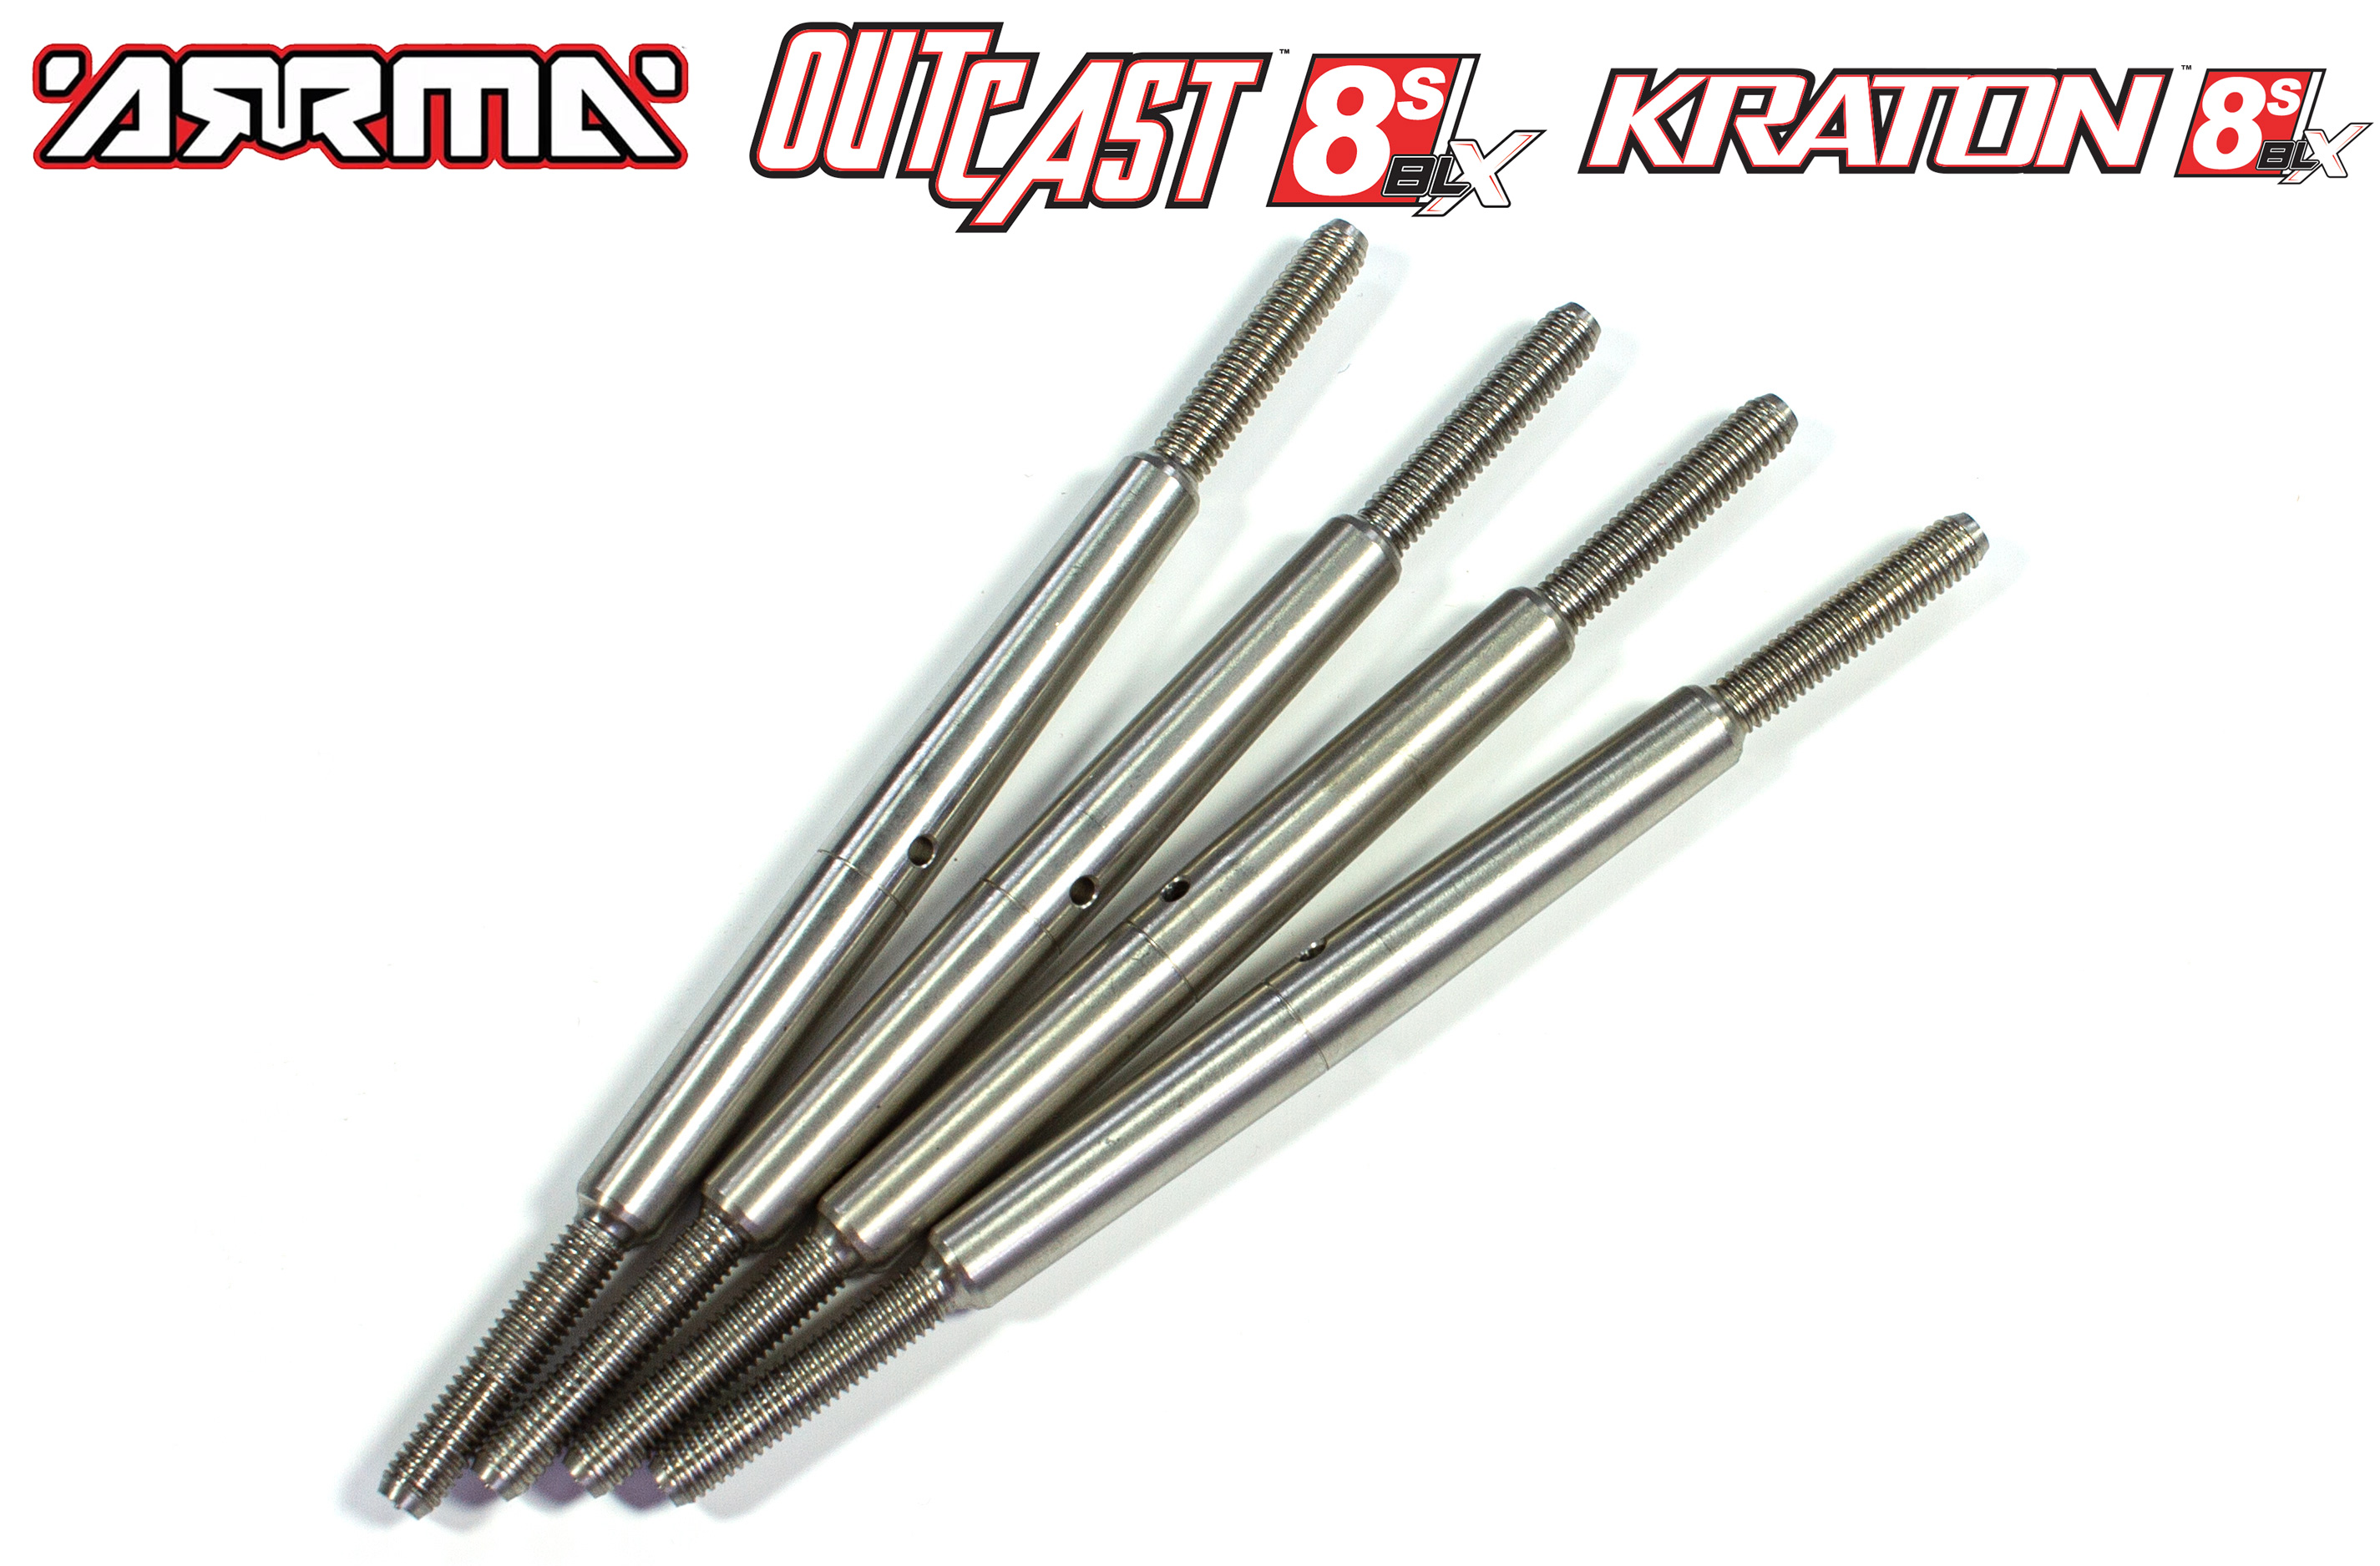 AKX160S/SH GPM steering rods / camber rods for Arrma Kraton / Outcast 8S